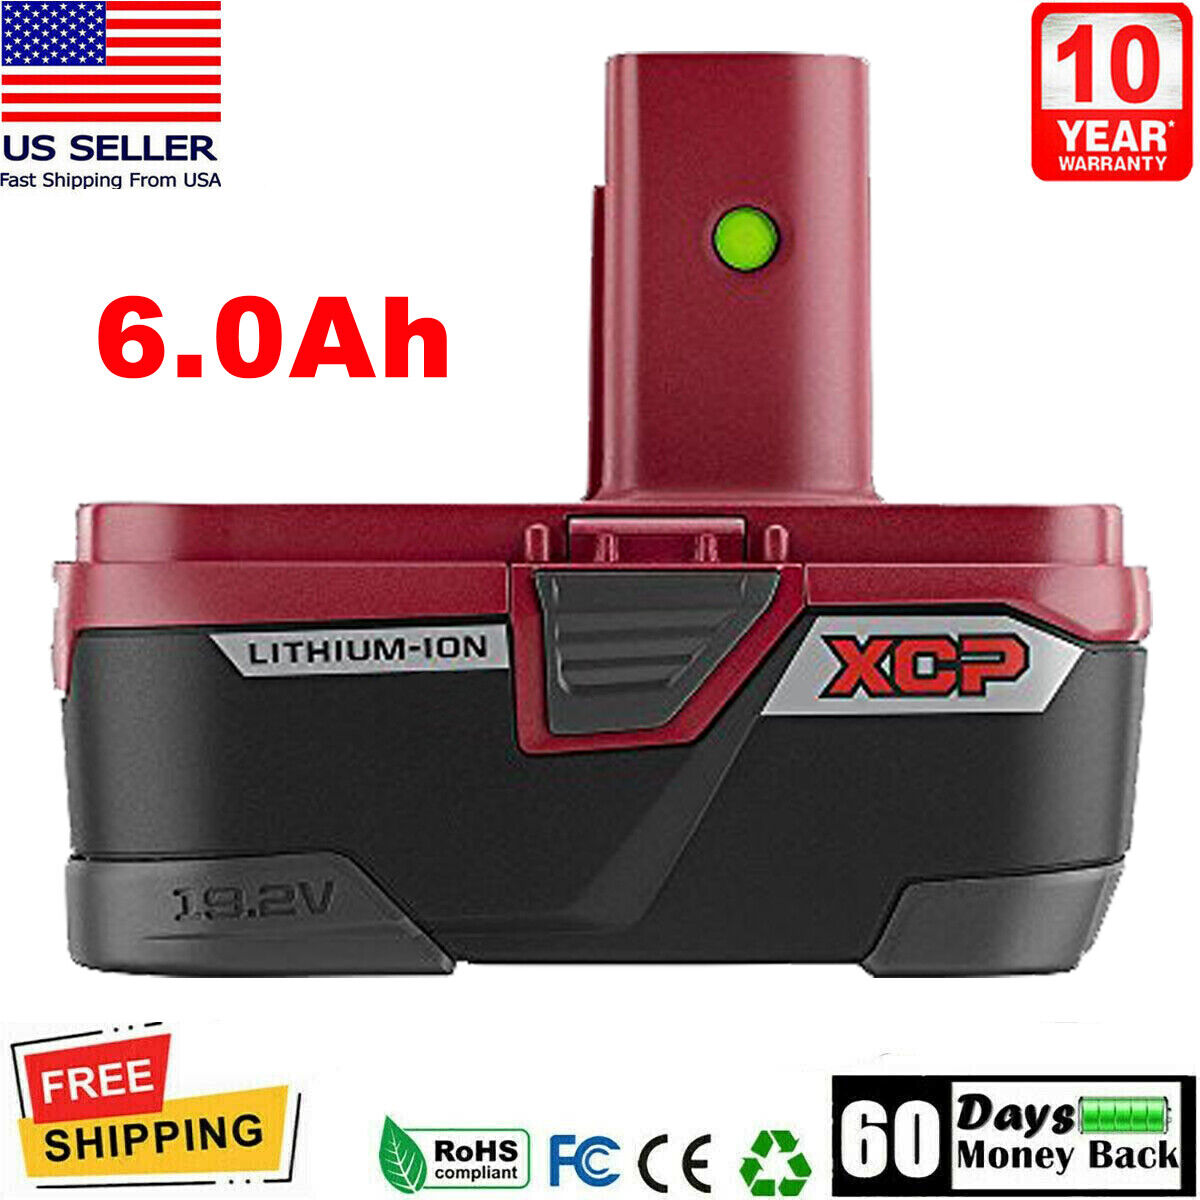 Craftsman 6.0Ah for Craftsman C3 XCP Lithium Ion Battery 19.2 Volt 130279005 PP2030 35702